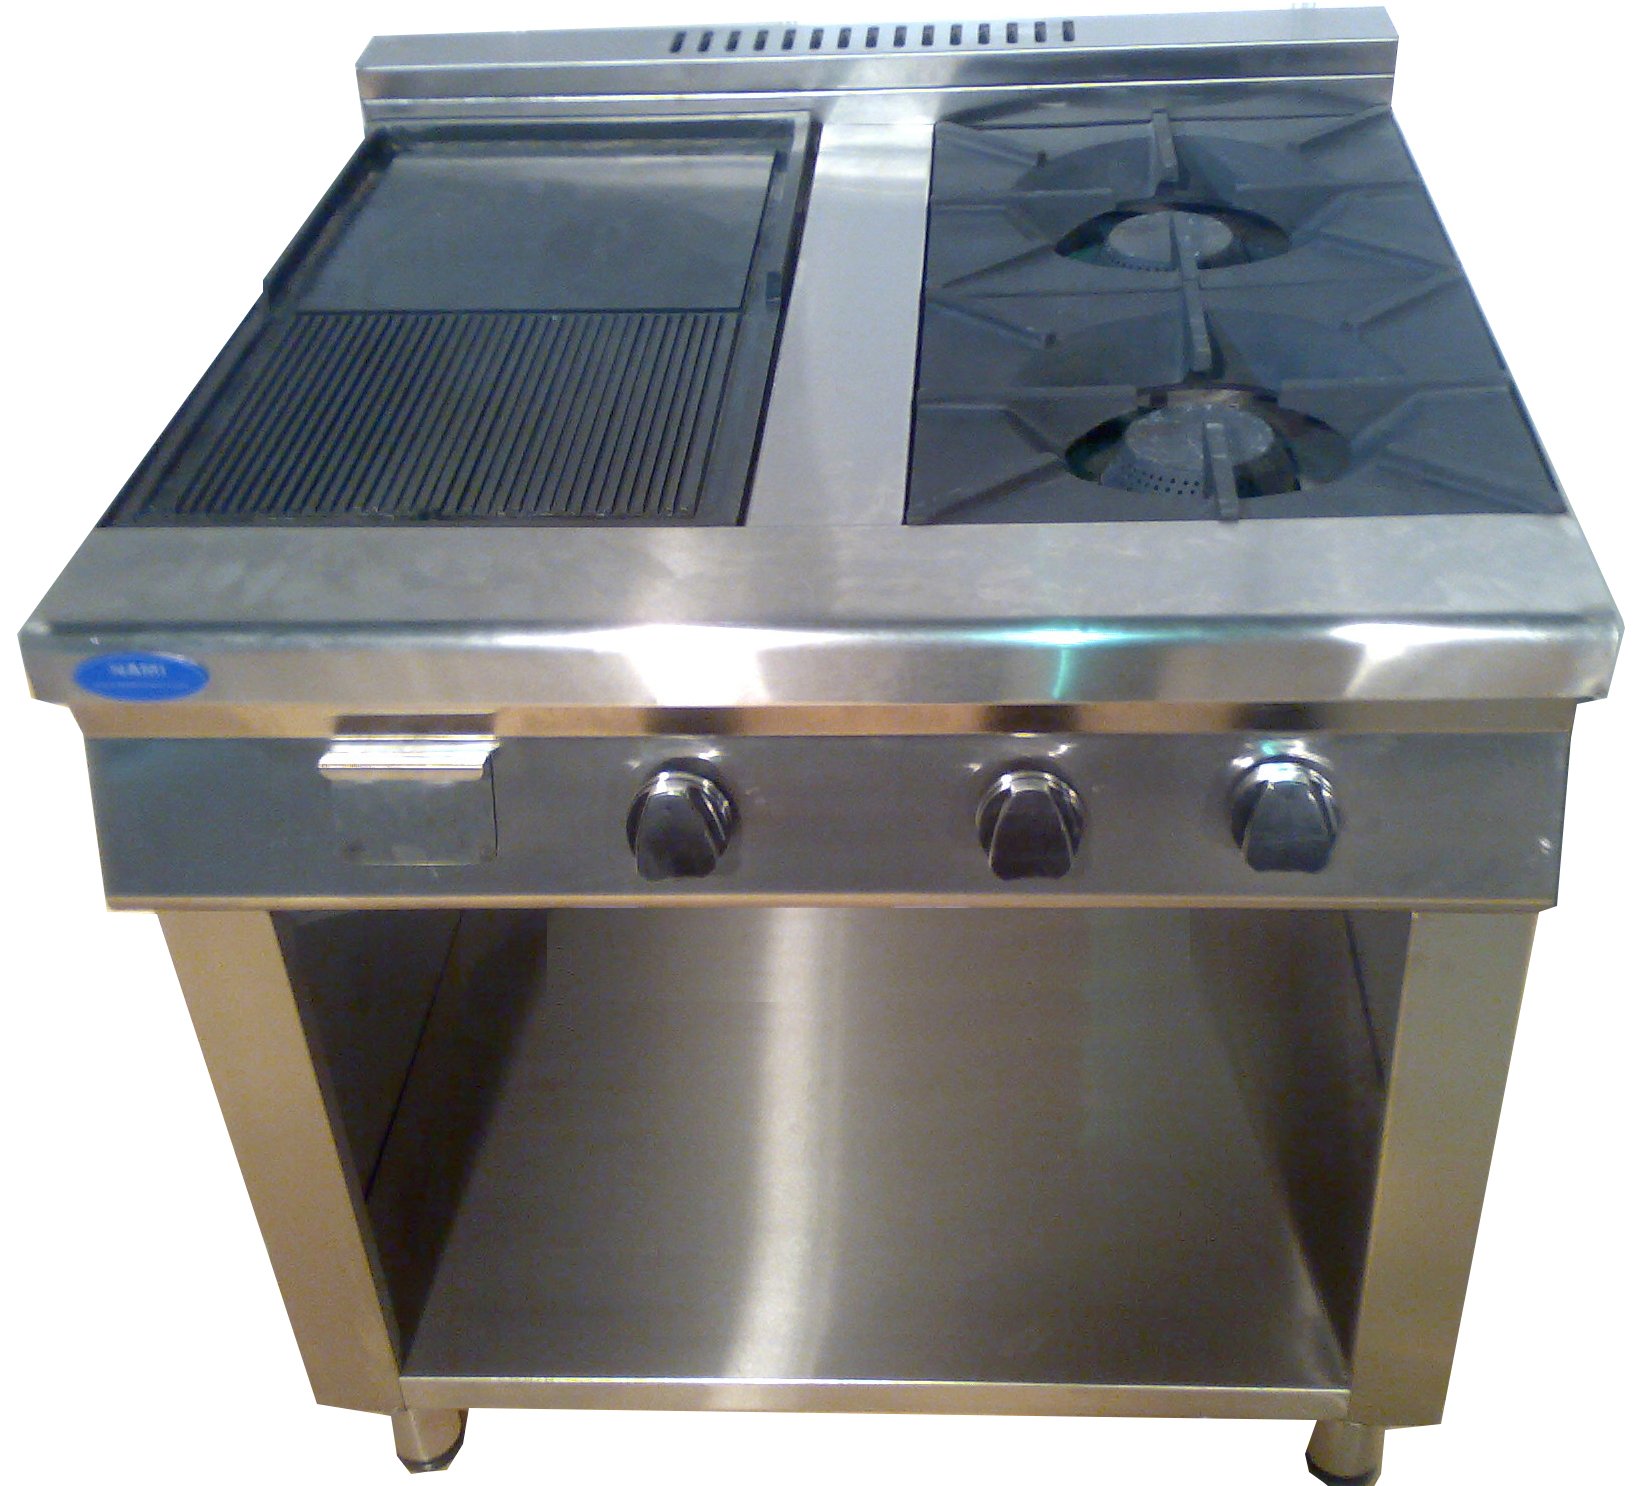 Gridel's two flame oven